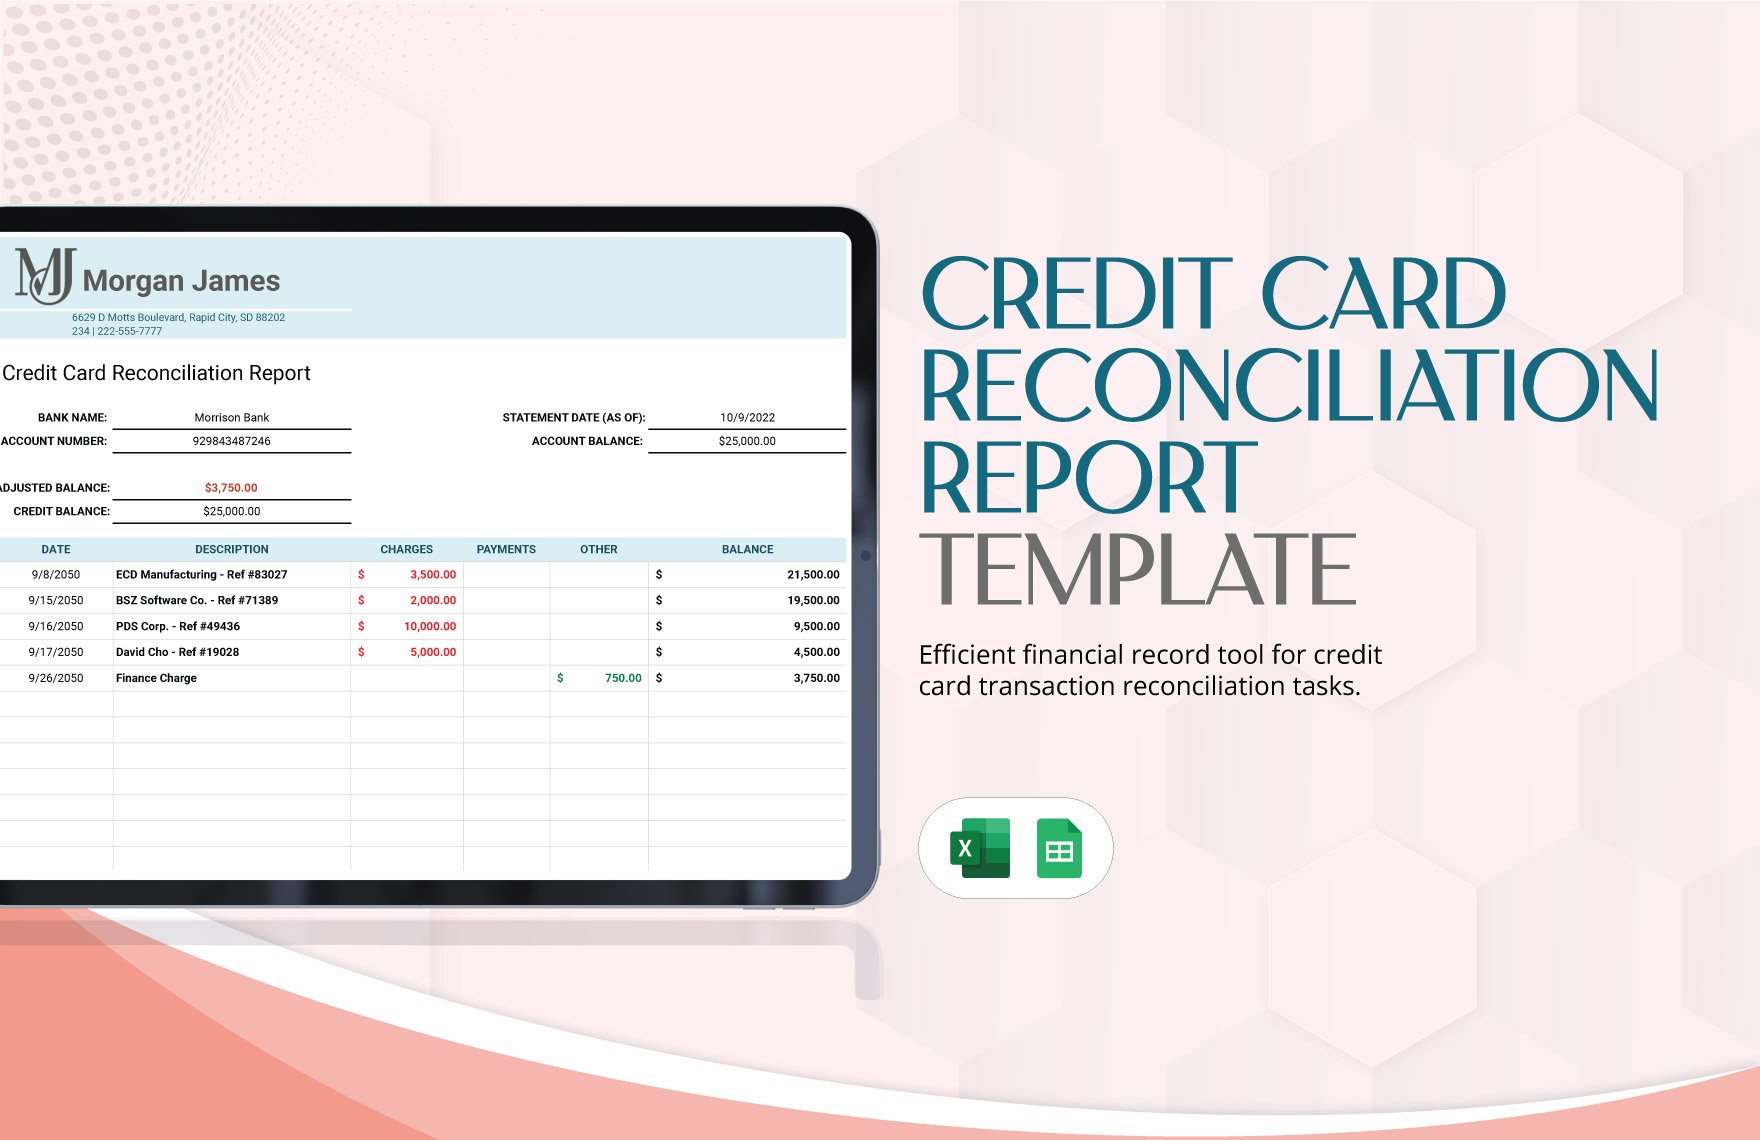 Credit Card Reconciliation Report Template in Excel, Google Sheets